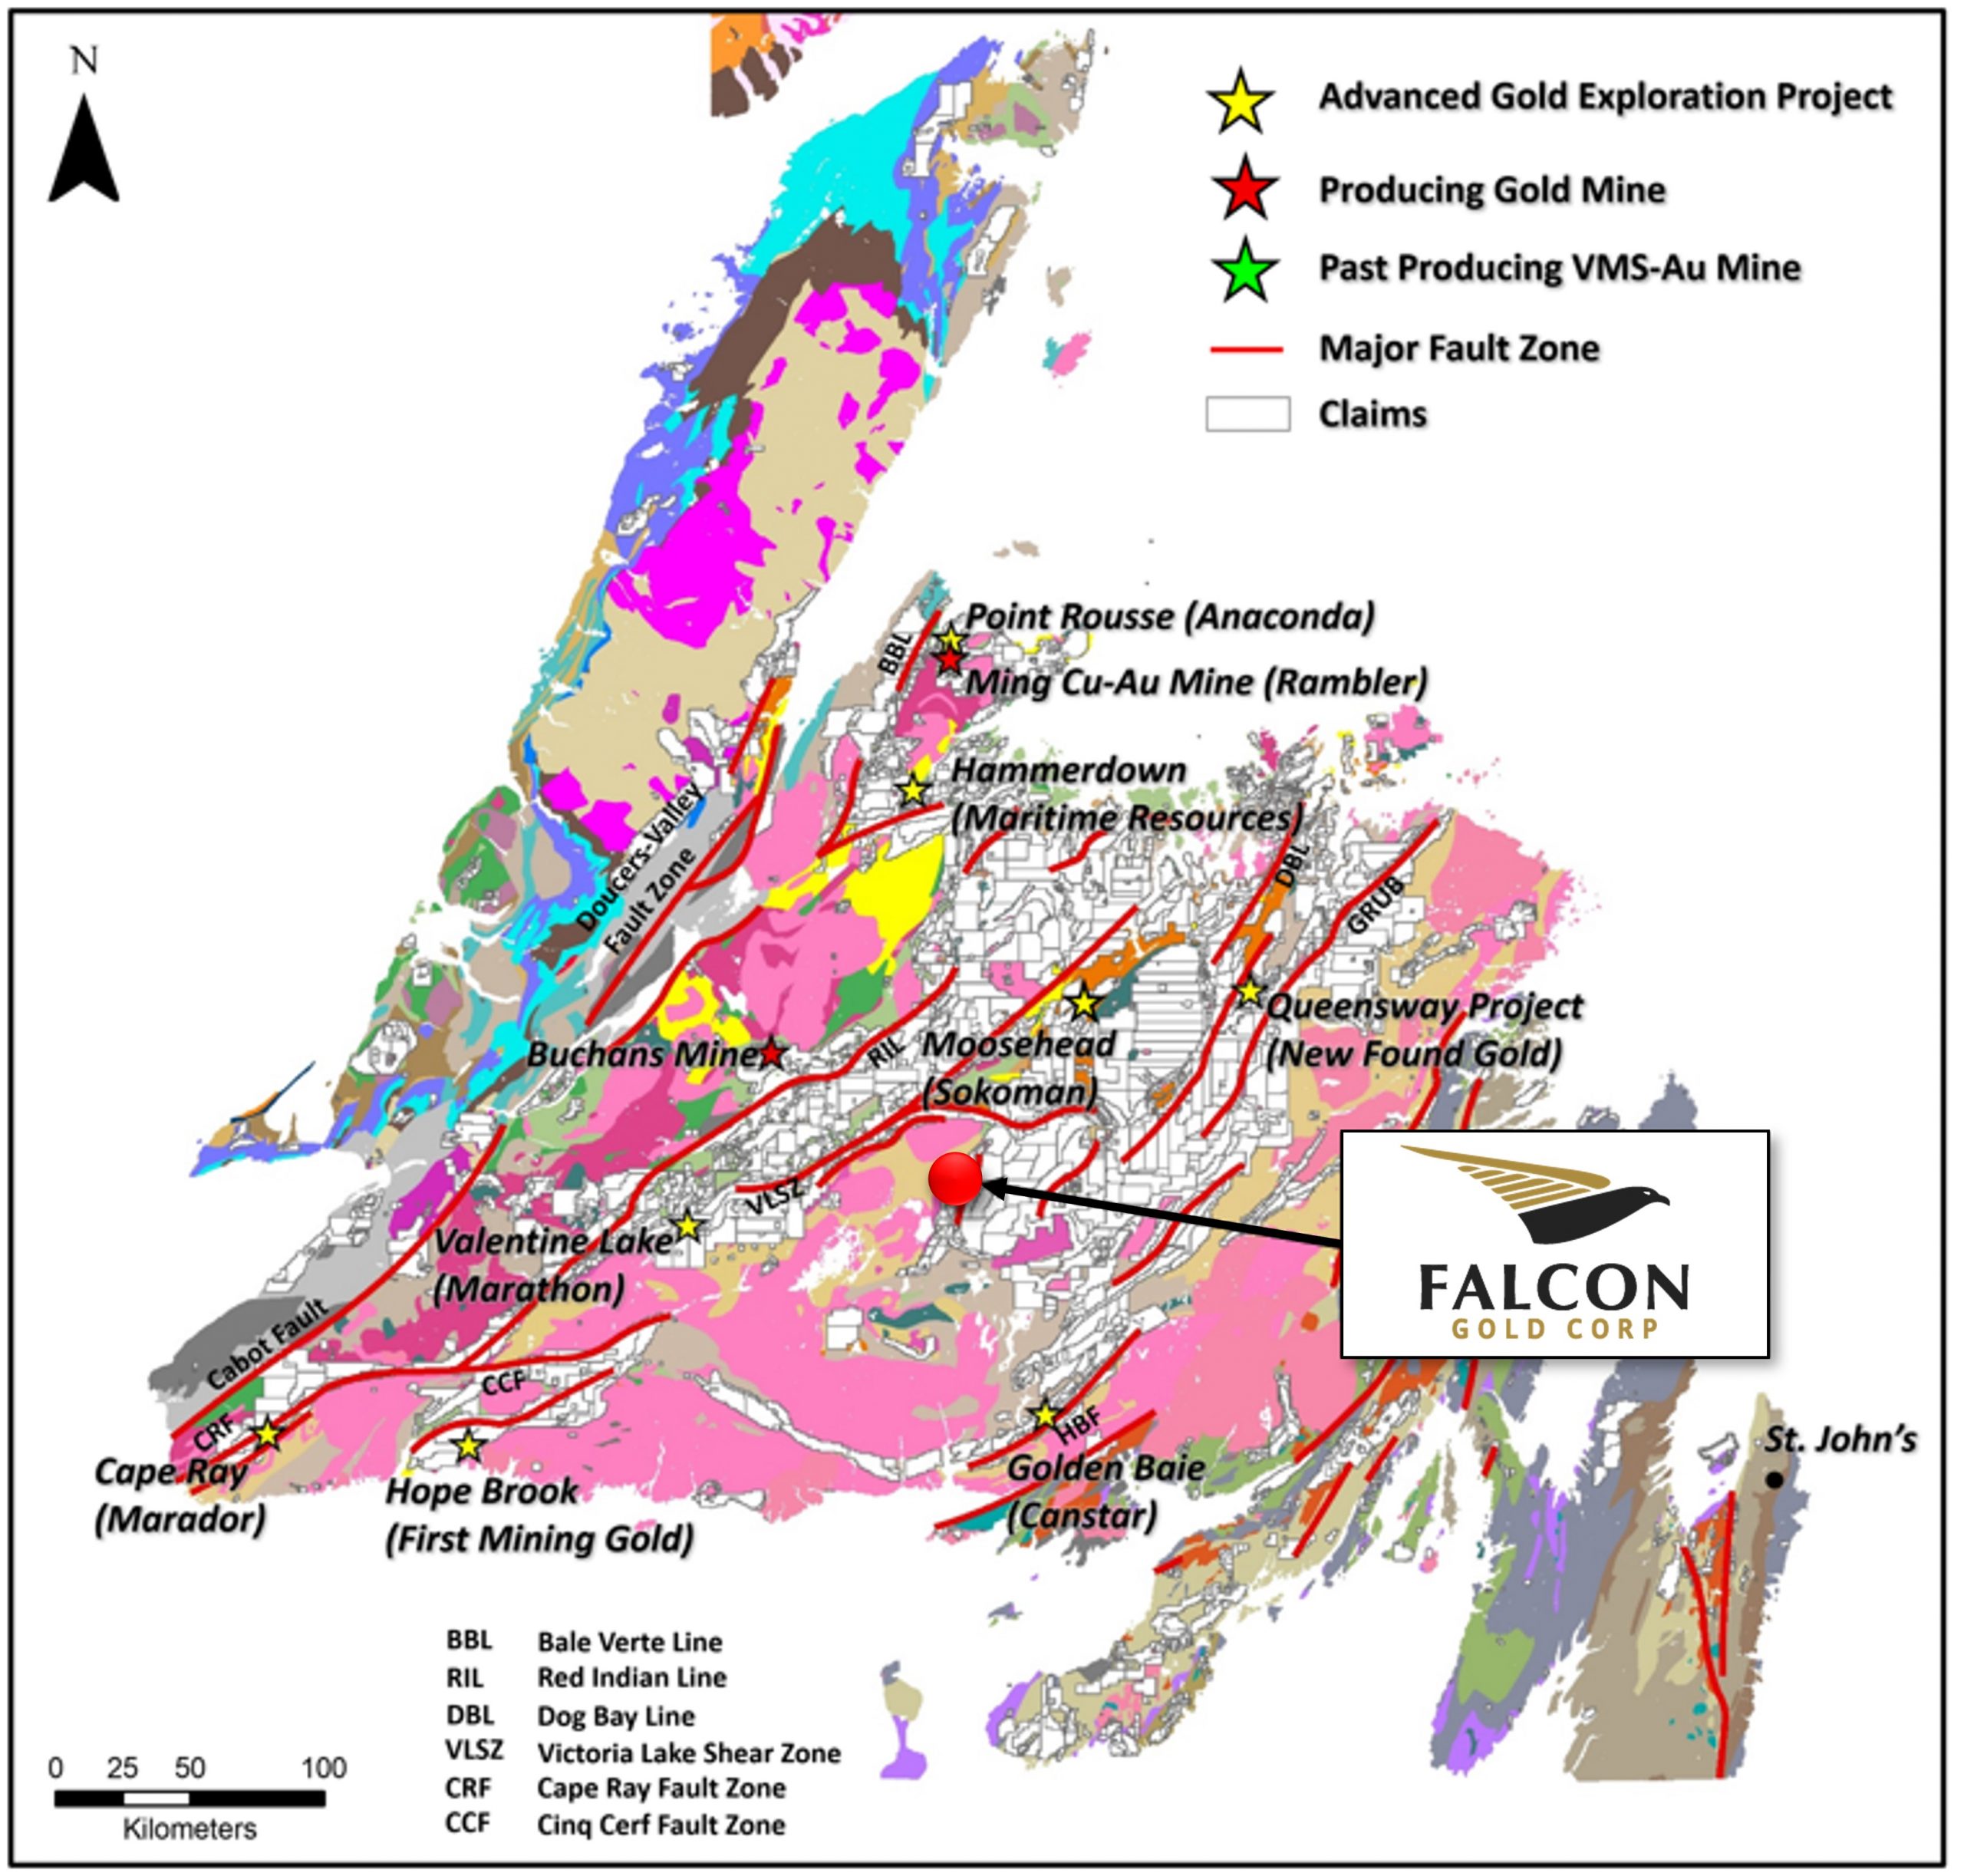 Great Burnt, NL Falcon Gold Corp Great Burnt, NL The Great Burnt Property is hosted within the Great Burnt greenstone belt (GBGB). The Great Burnt greenstone belt is host to the Great Burnt Copper Zone with an indicated resource of 381,300 tonnes at 2.68% Cu and inferred resources of 663,100 tonnes at 2.10% Cu. 